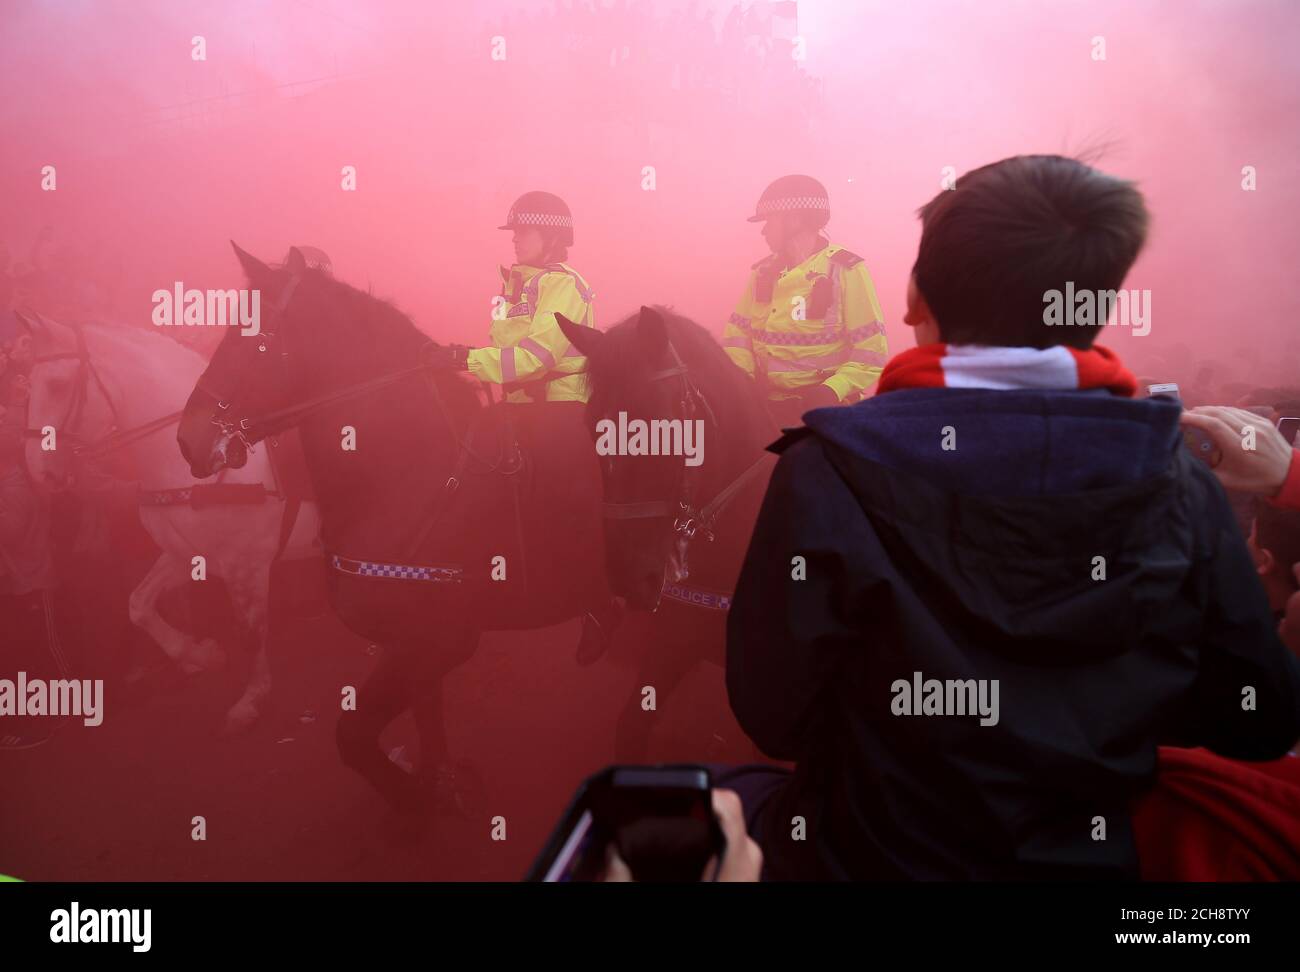 Mounted Police surrounded by Liverpool fans and in red smoke Stock Photo